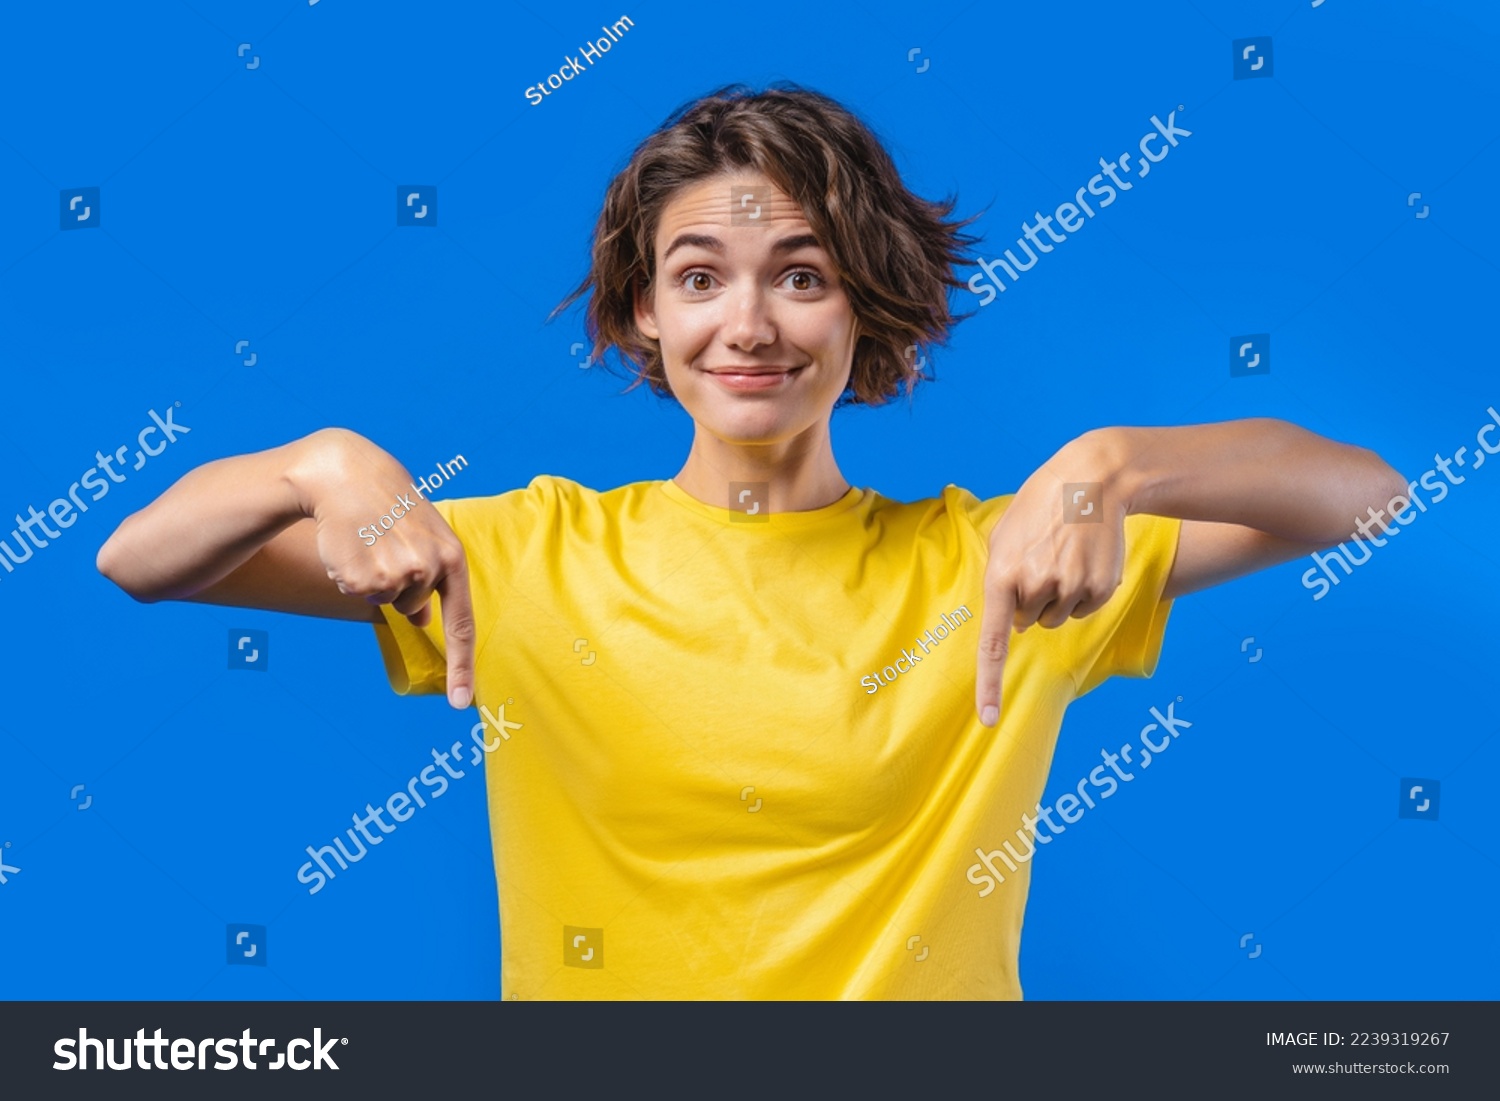 Pretty woman pointing down to advertising area. Blue background. Young lady asking to click to subscribe below. Copy space for your commercial idea, promotional content. High quality photo #2239319267